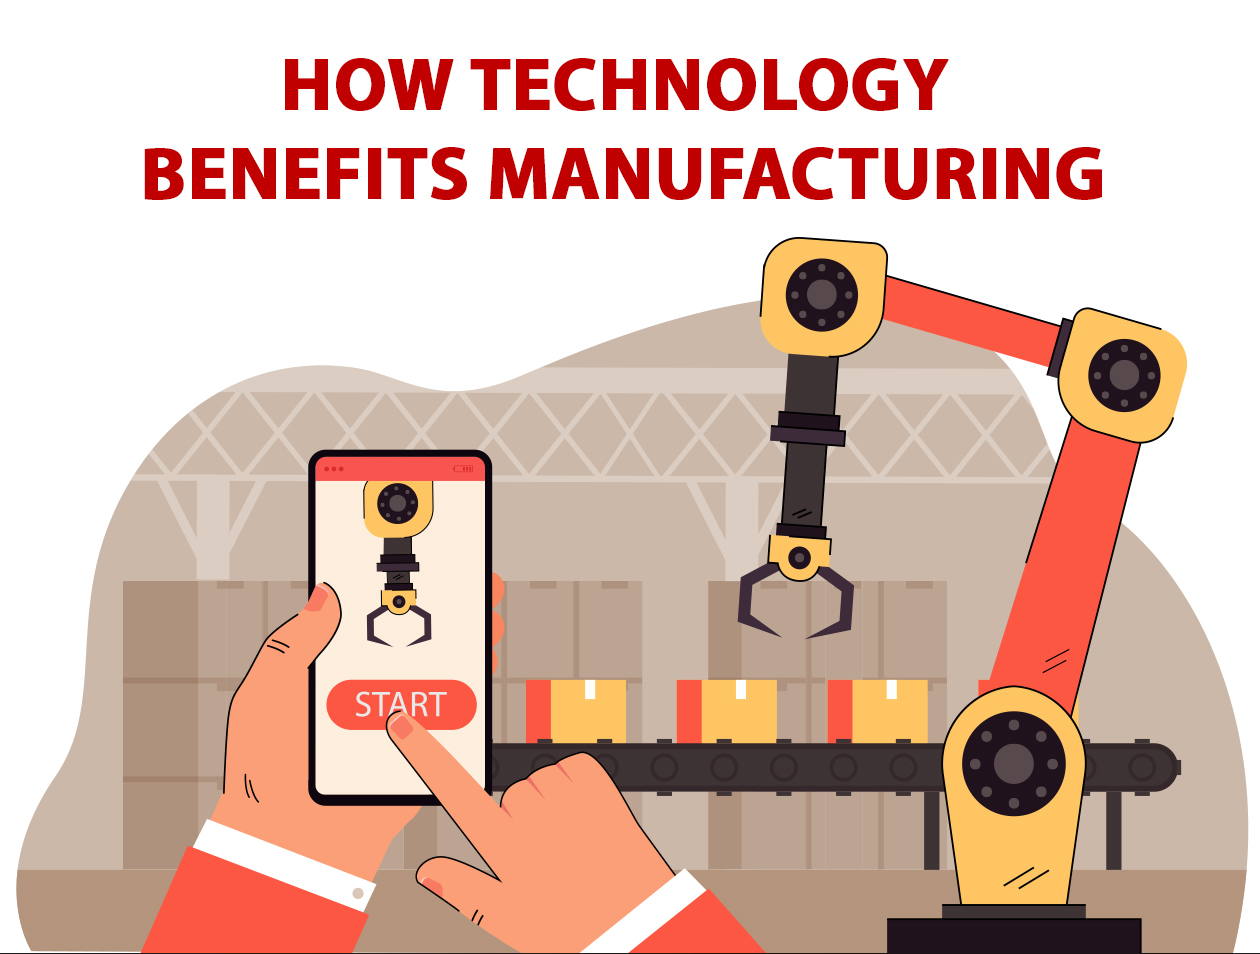 How Is Technology Benefiting Manufacturing?